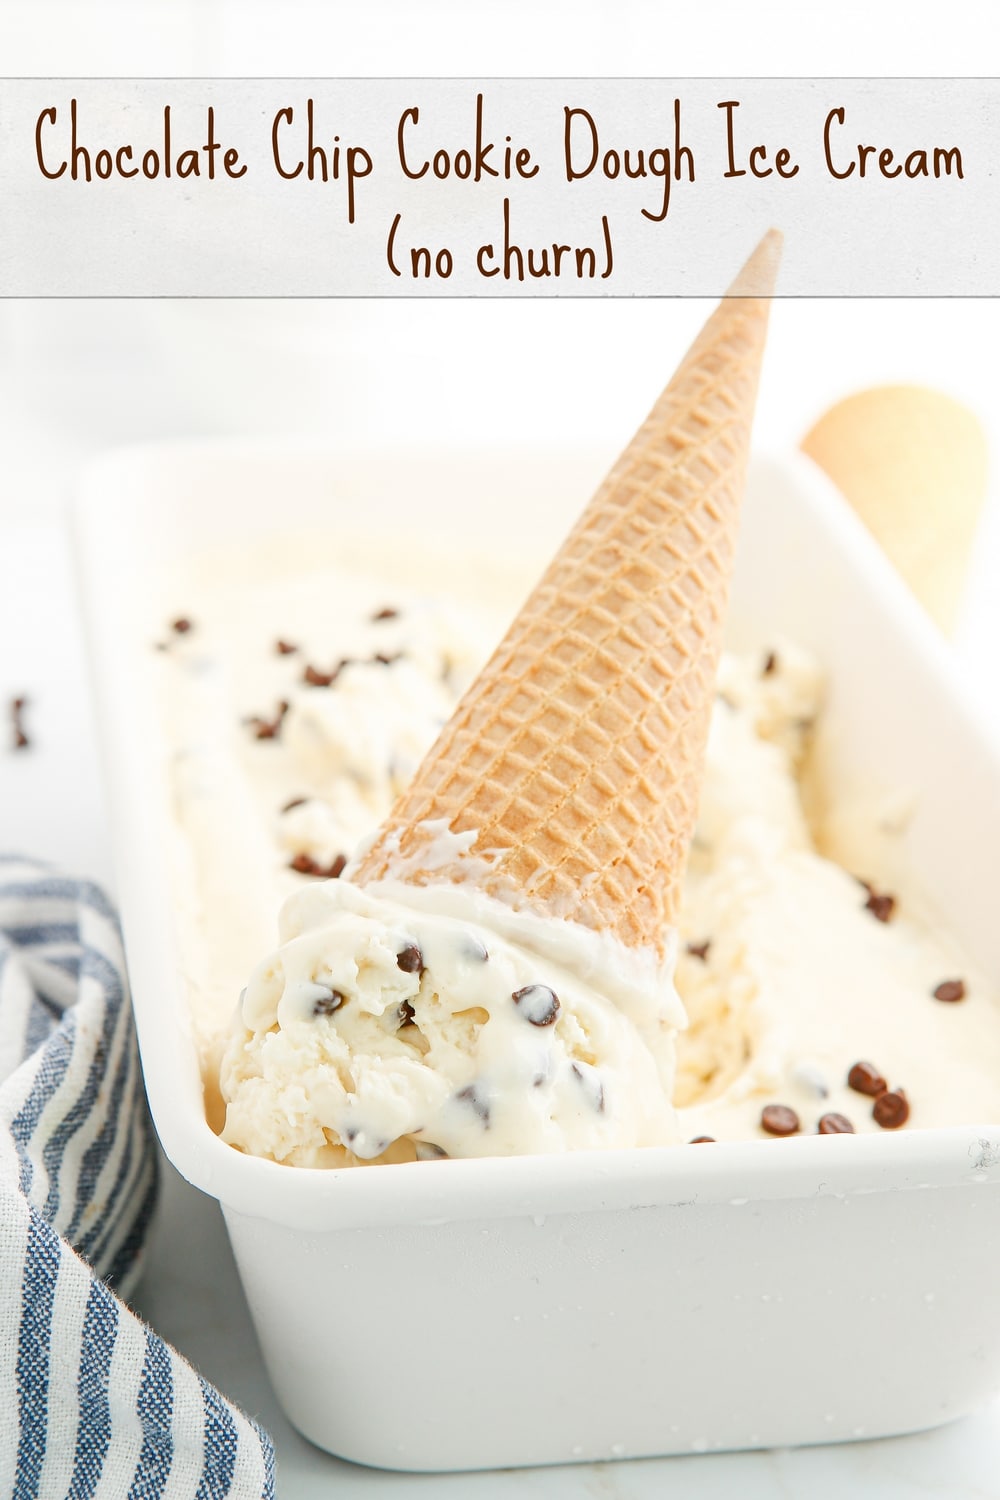 Cookie dough ice cream filled with mini chocolate chips and tastes like your favorite brand of chocolate chip cookie dough ice cream. No ice cream maker needed is for this no churn version and does not even require purchasing a tub of cookie dough to make it happen. #chocolatechip #cookiedough #icecream via @cmpollak1